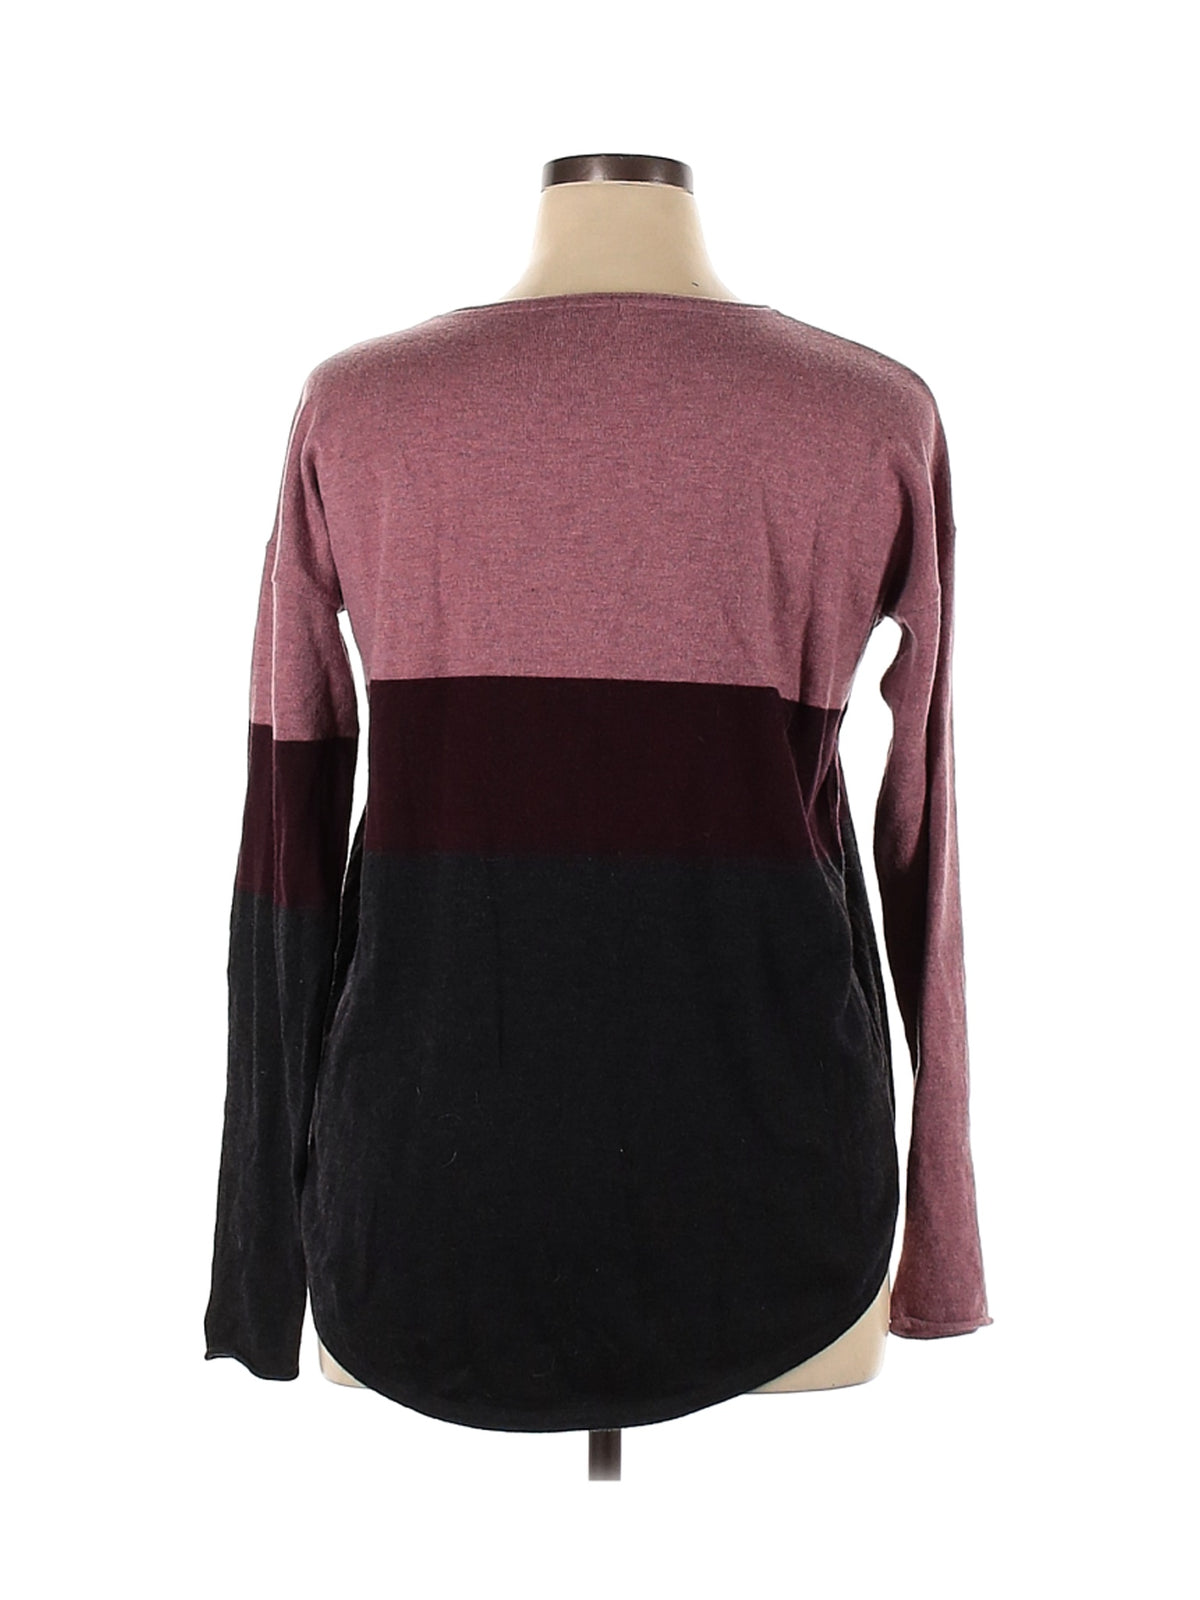 Pullover Sweater size - XL